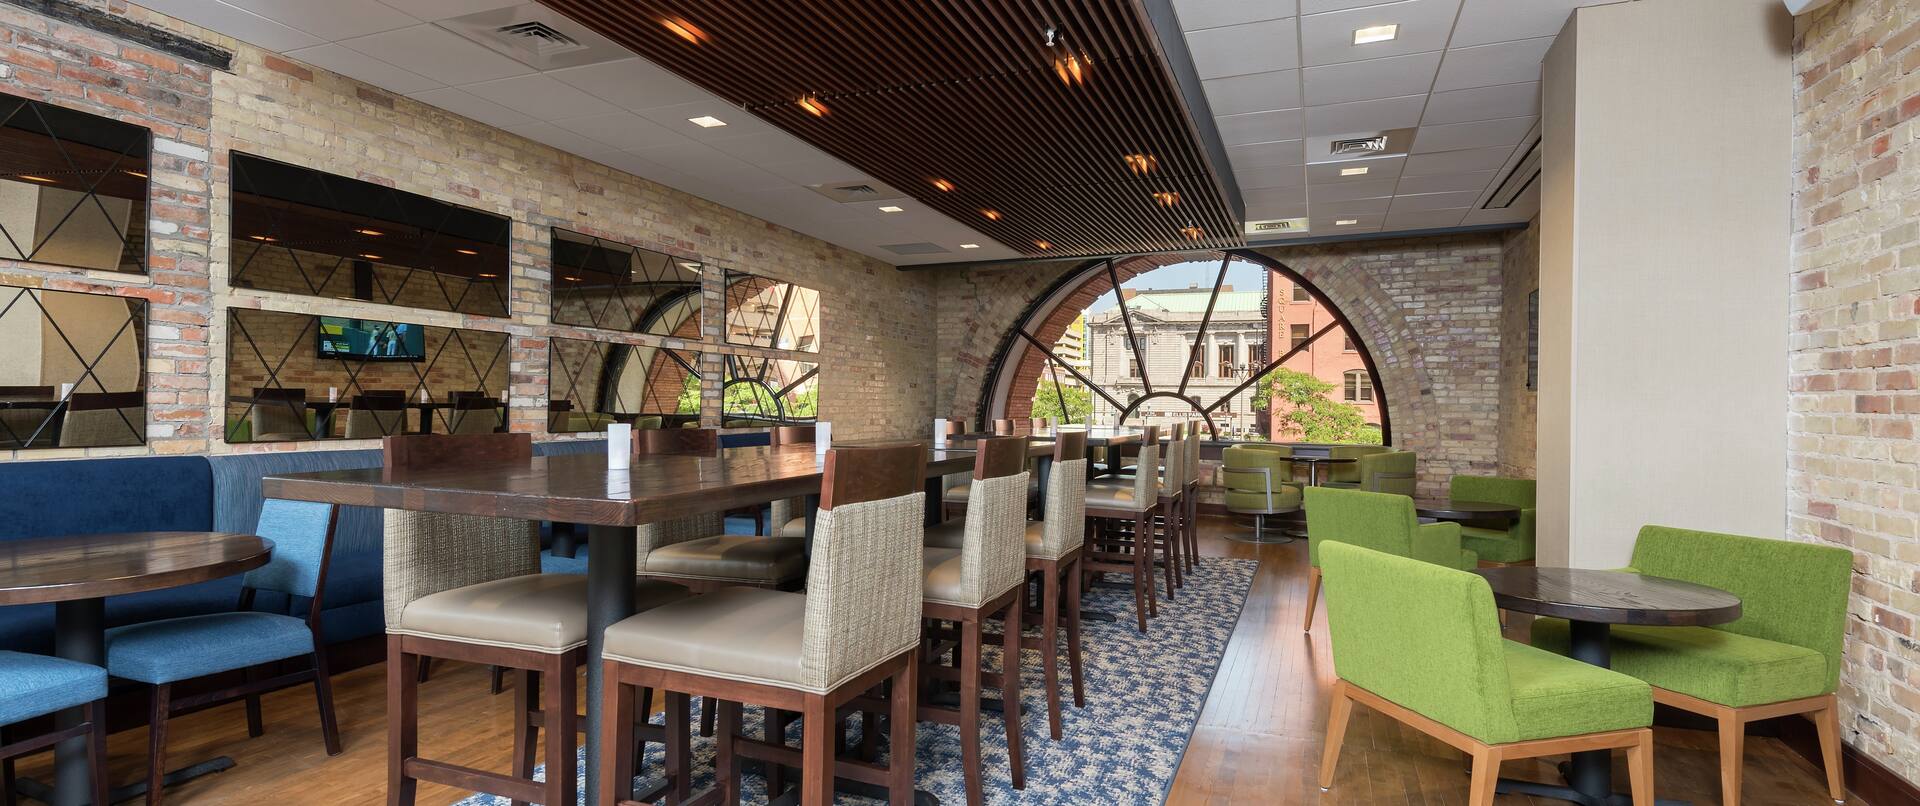 Tables, Chairs, and Booth Seating In Dining Area With Large Semicircle Windows